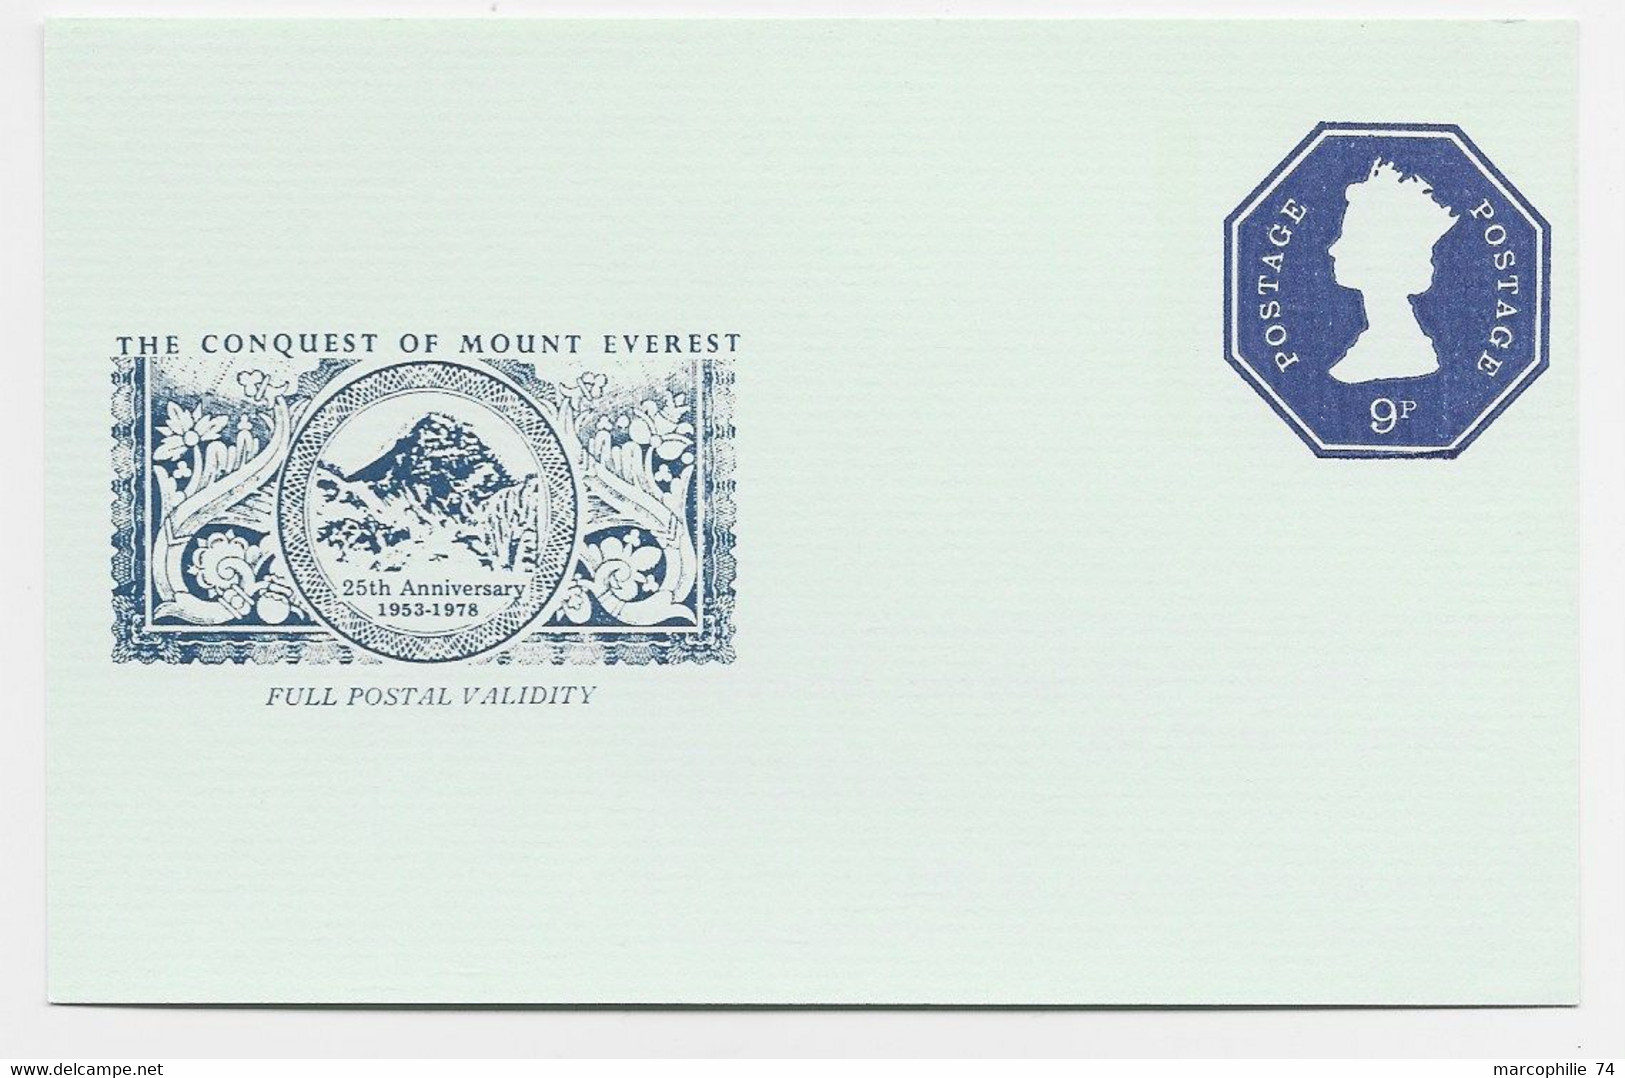 ENGLAND ENTIER POST CARD 9P THE CONQUEST MOUNT EVEREST EXPEDITION HIMALAYA 25TH ANNIVERSARY 1953 .1978 TIRAGE 500 - Escalade